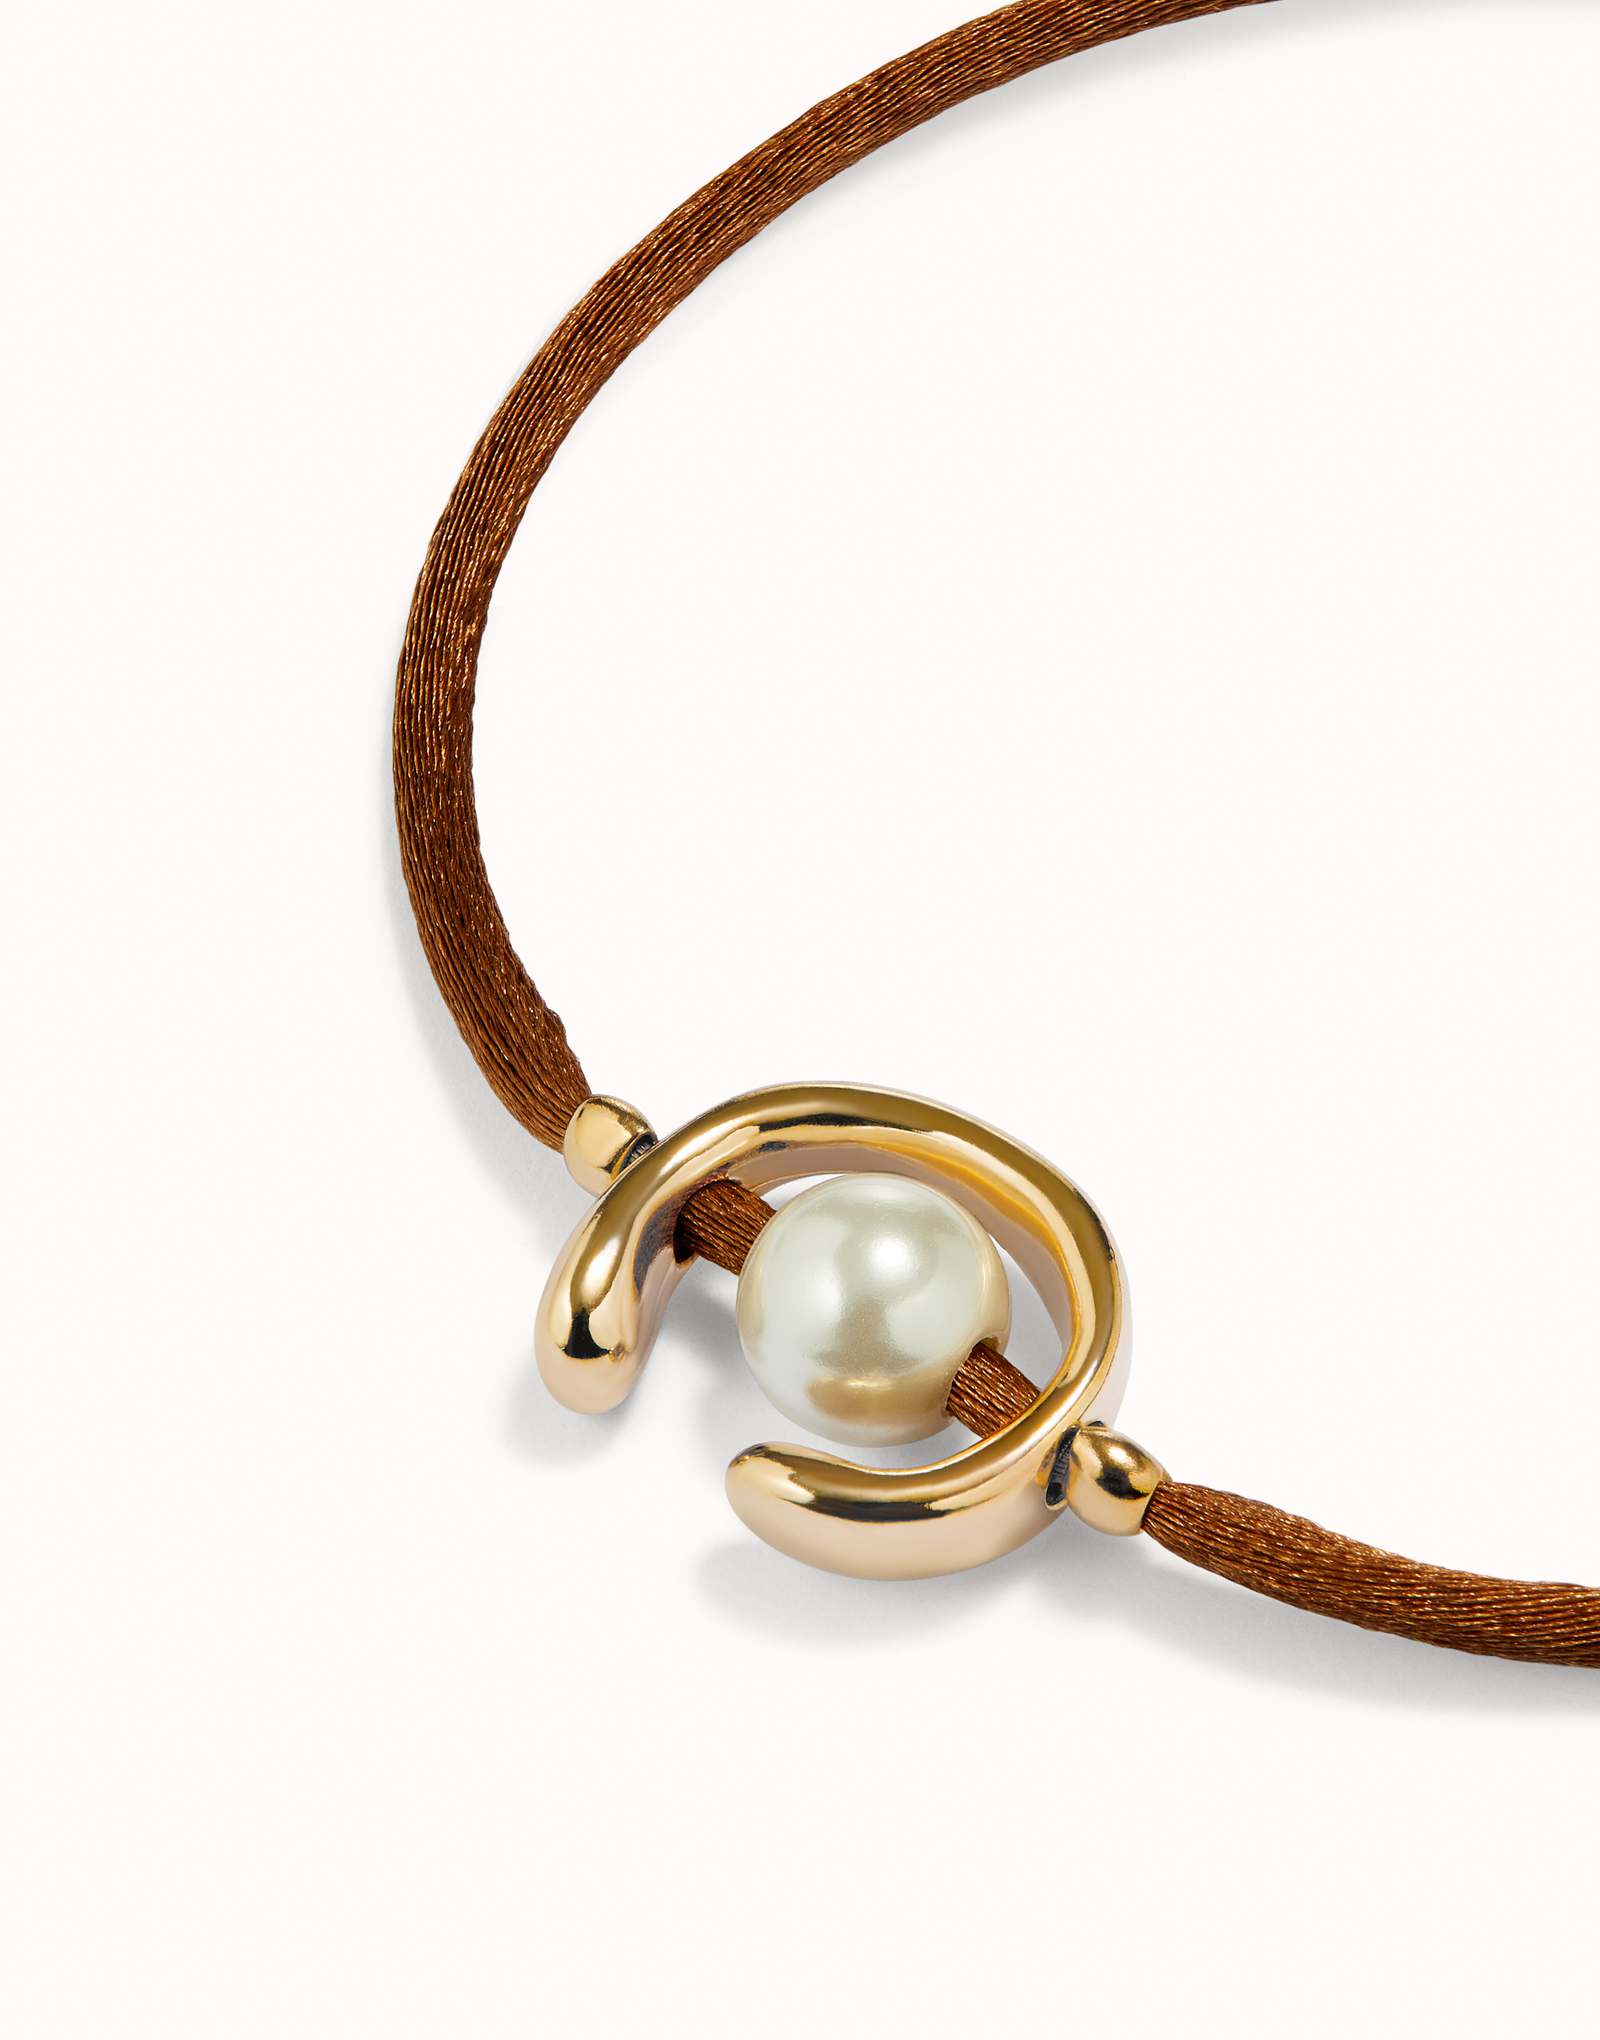 18K gold-plated brown thread bracelet with shell pearl accessory., Golden, large image number null